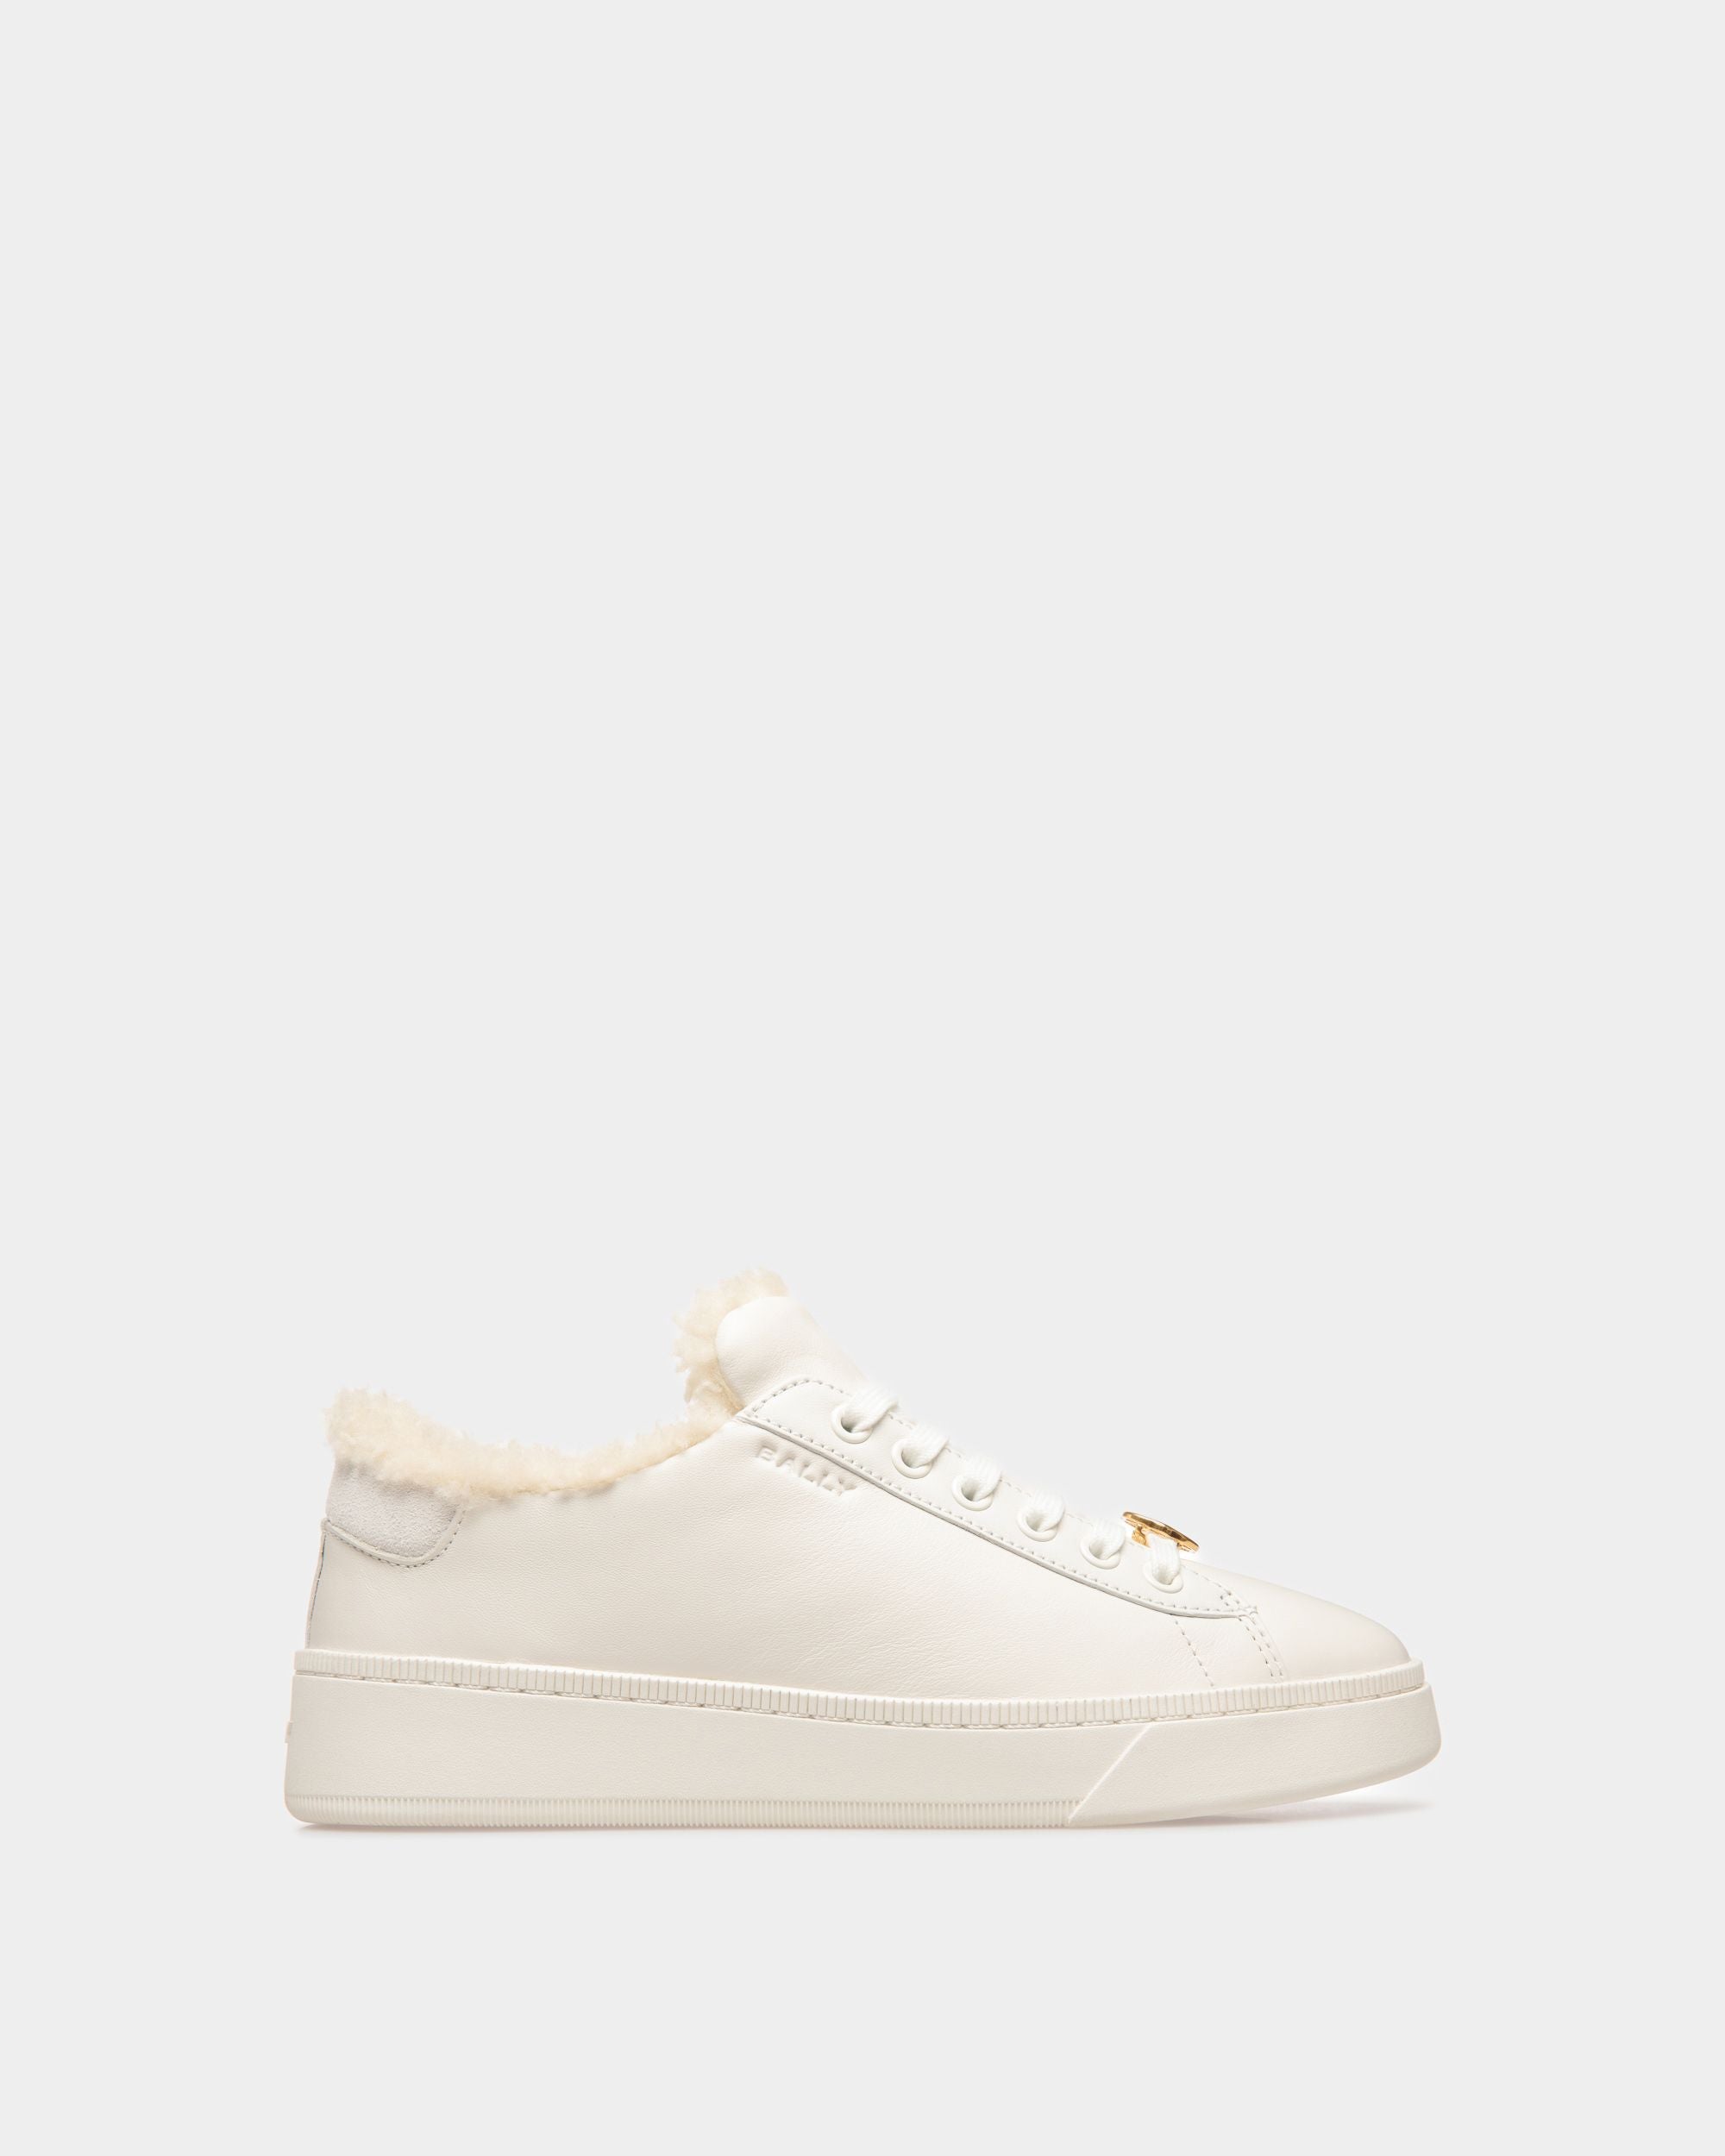 Ryver | Women's Sneakers | White Leather | Bally | Still Life Side